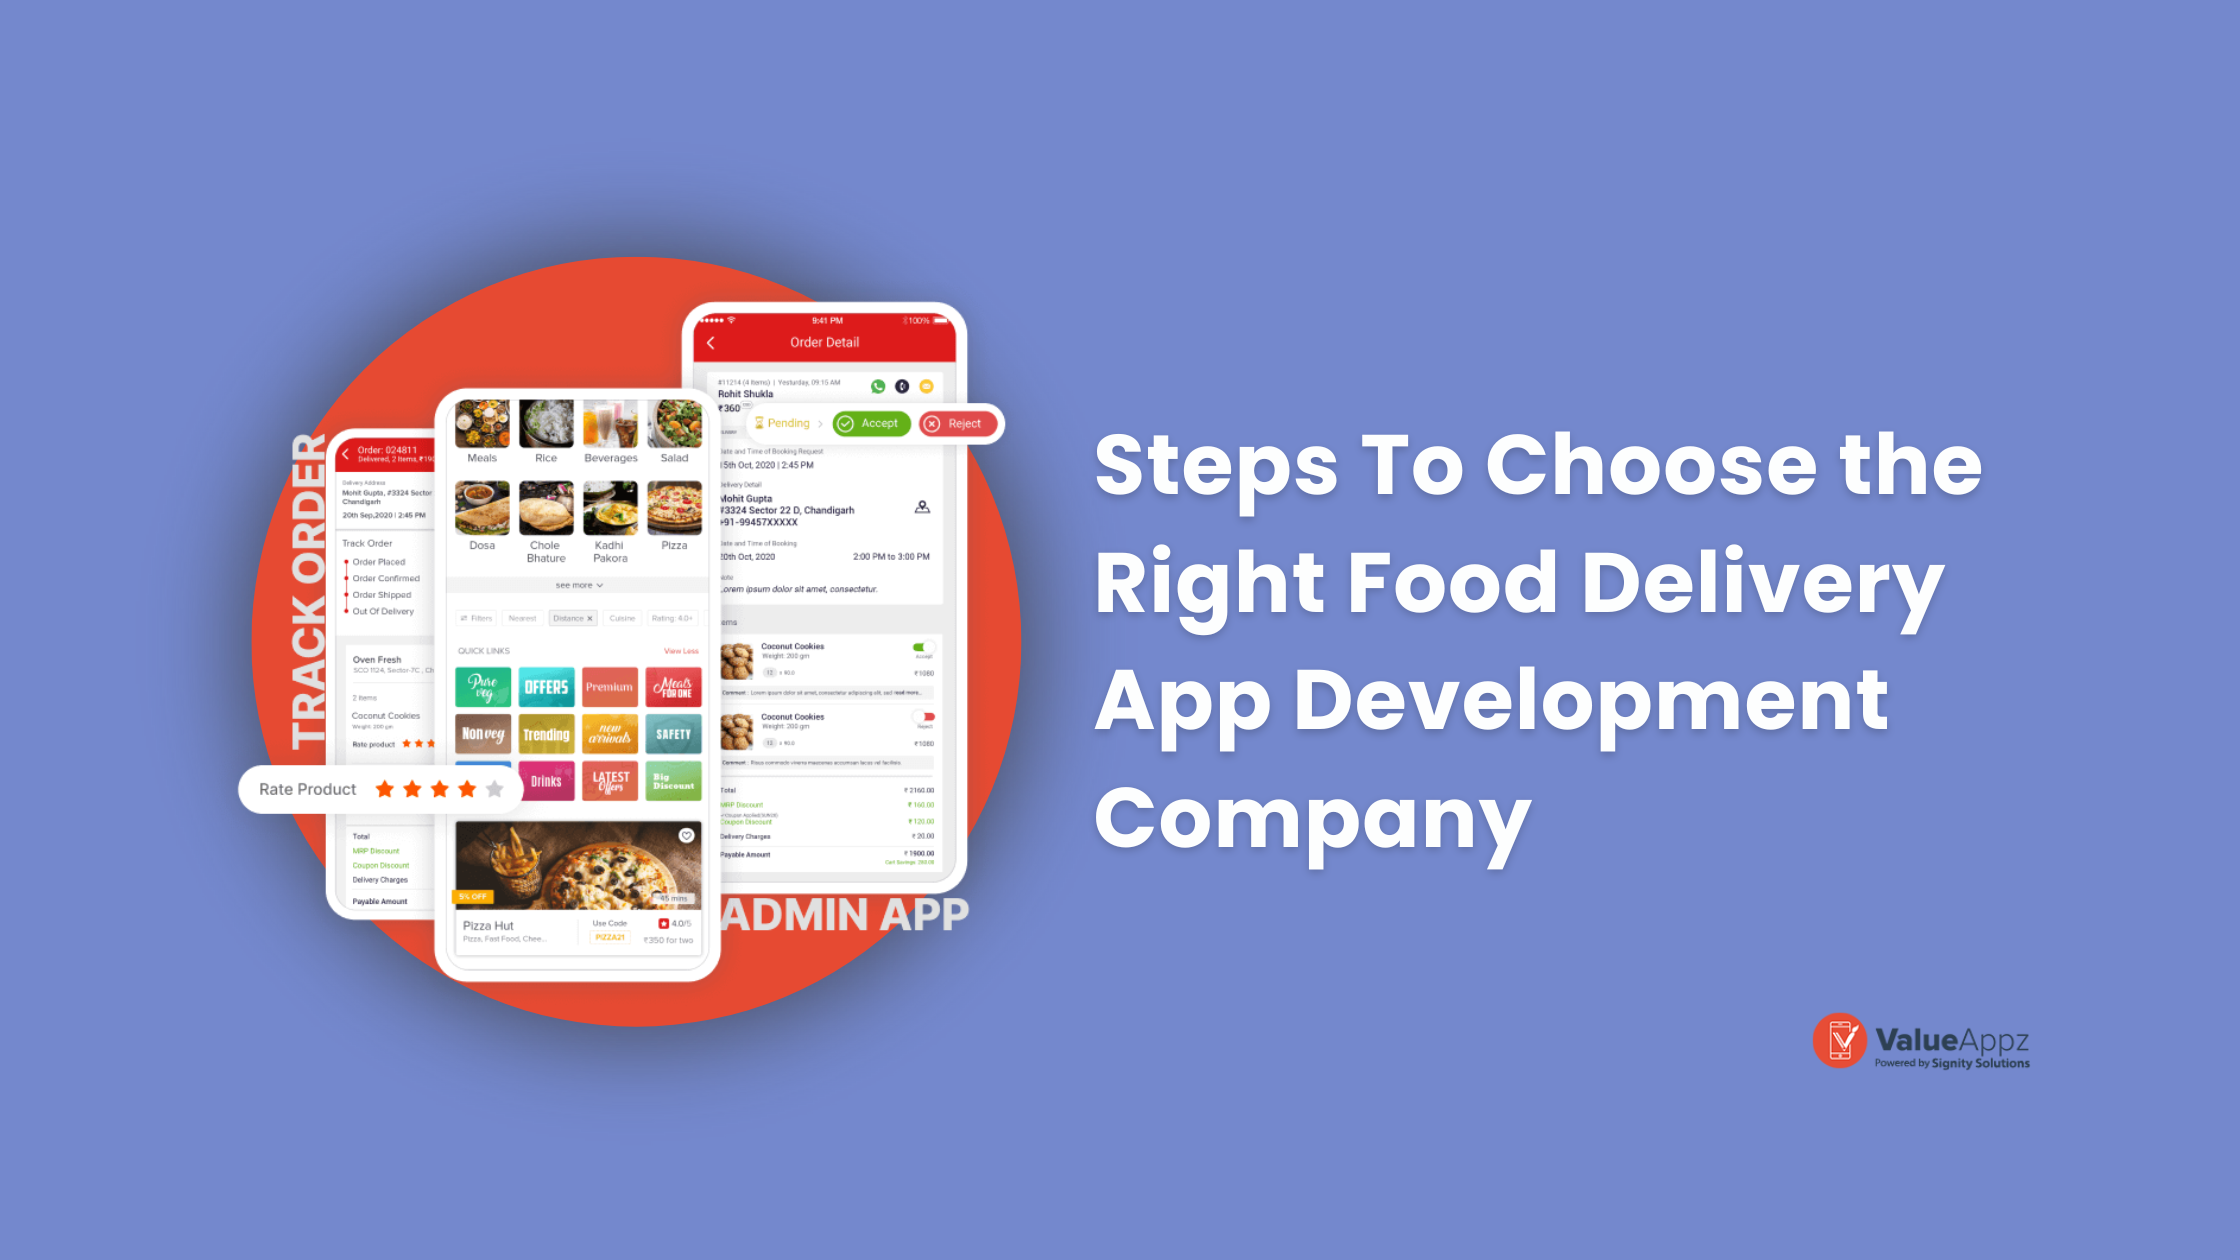 Steps To Choose the Right Food Delivery App Development Company - ValueAppz